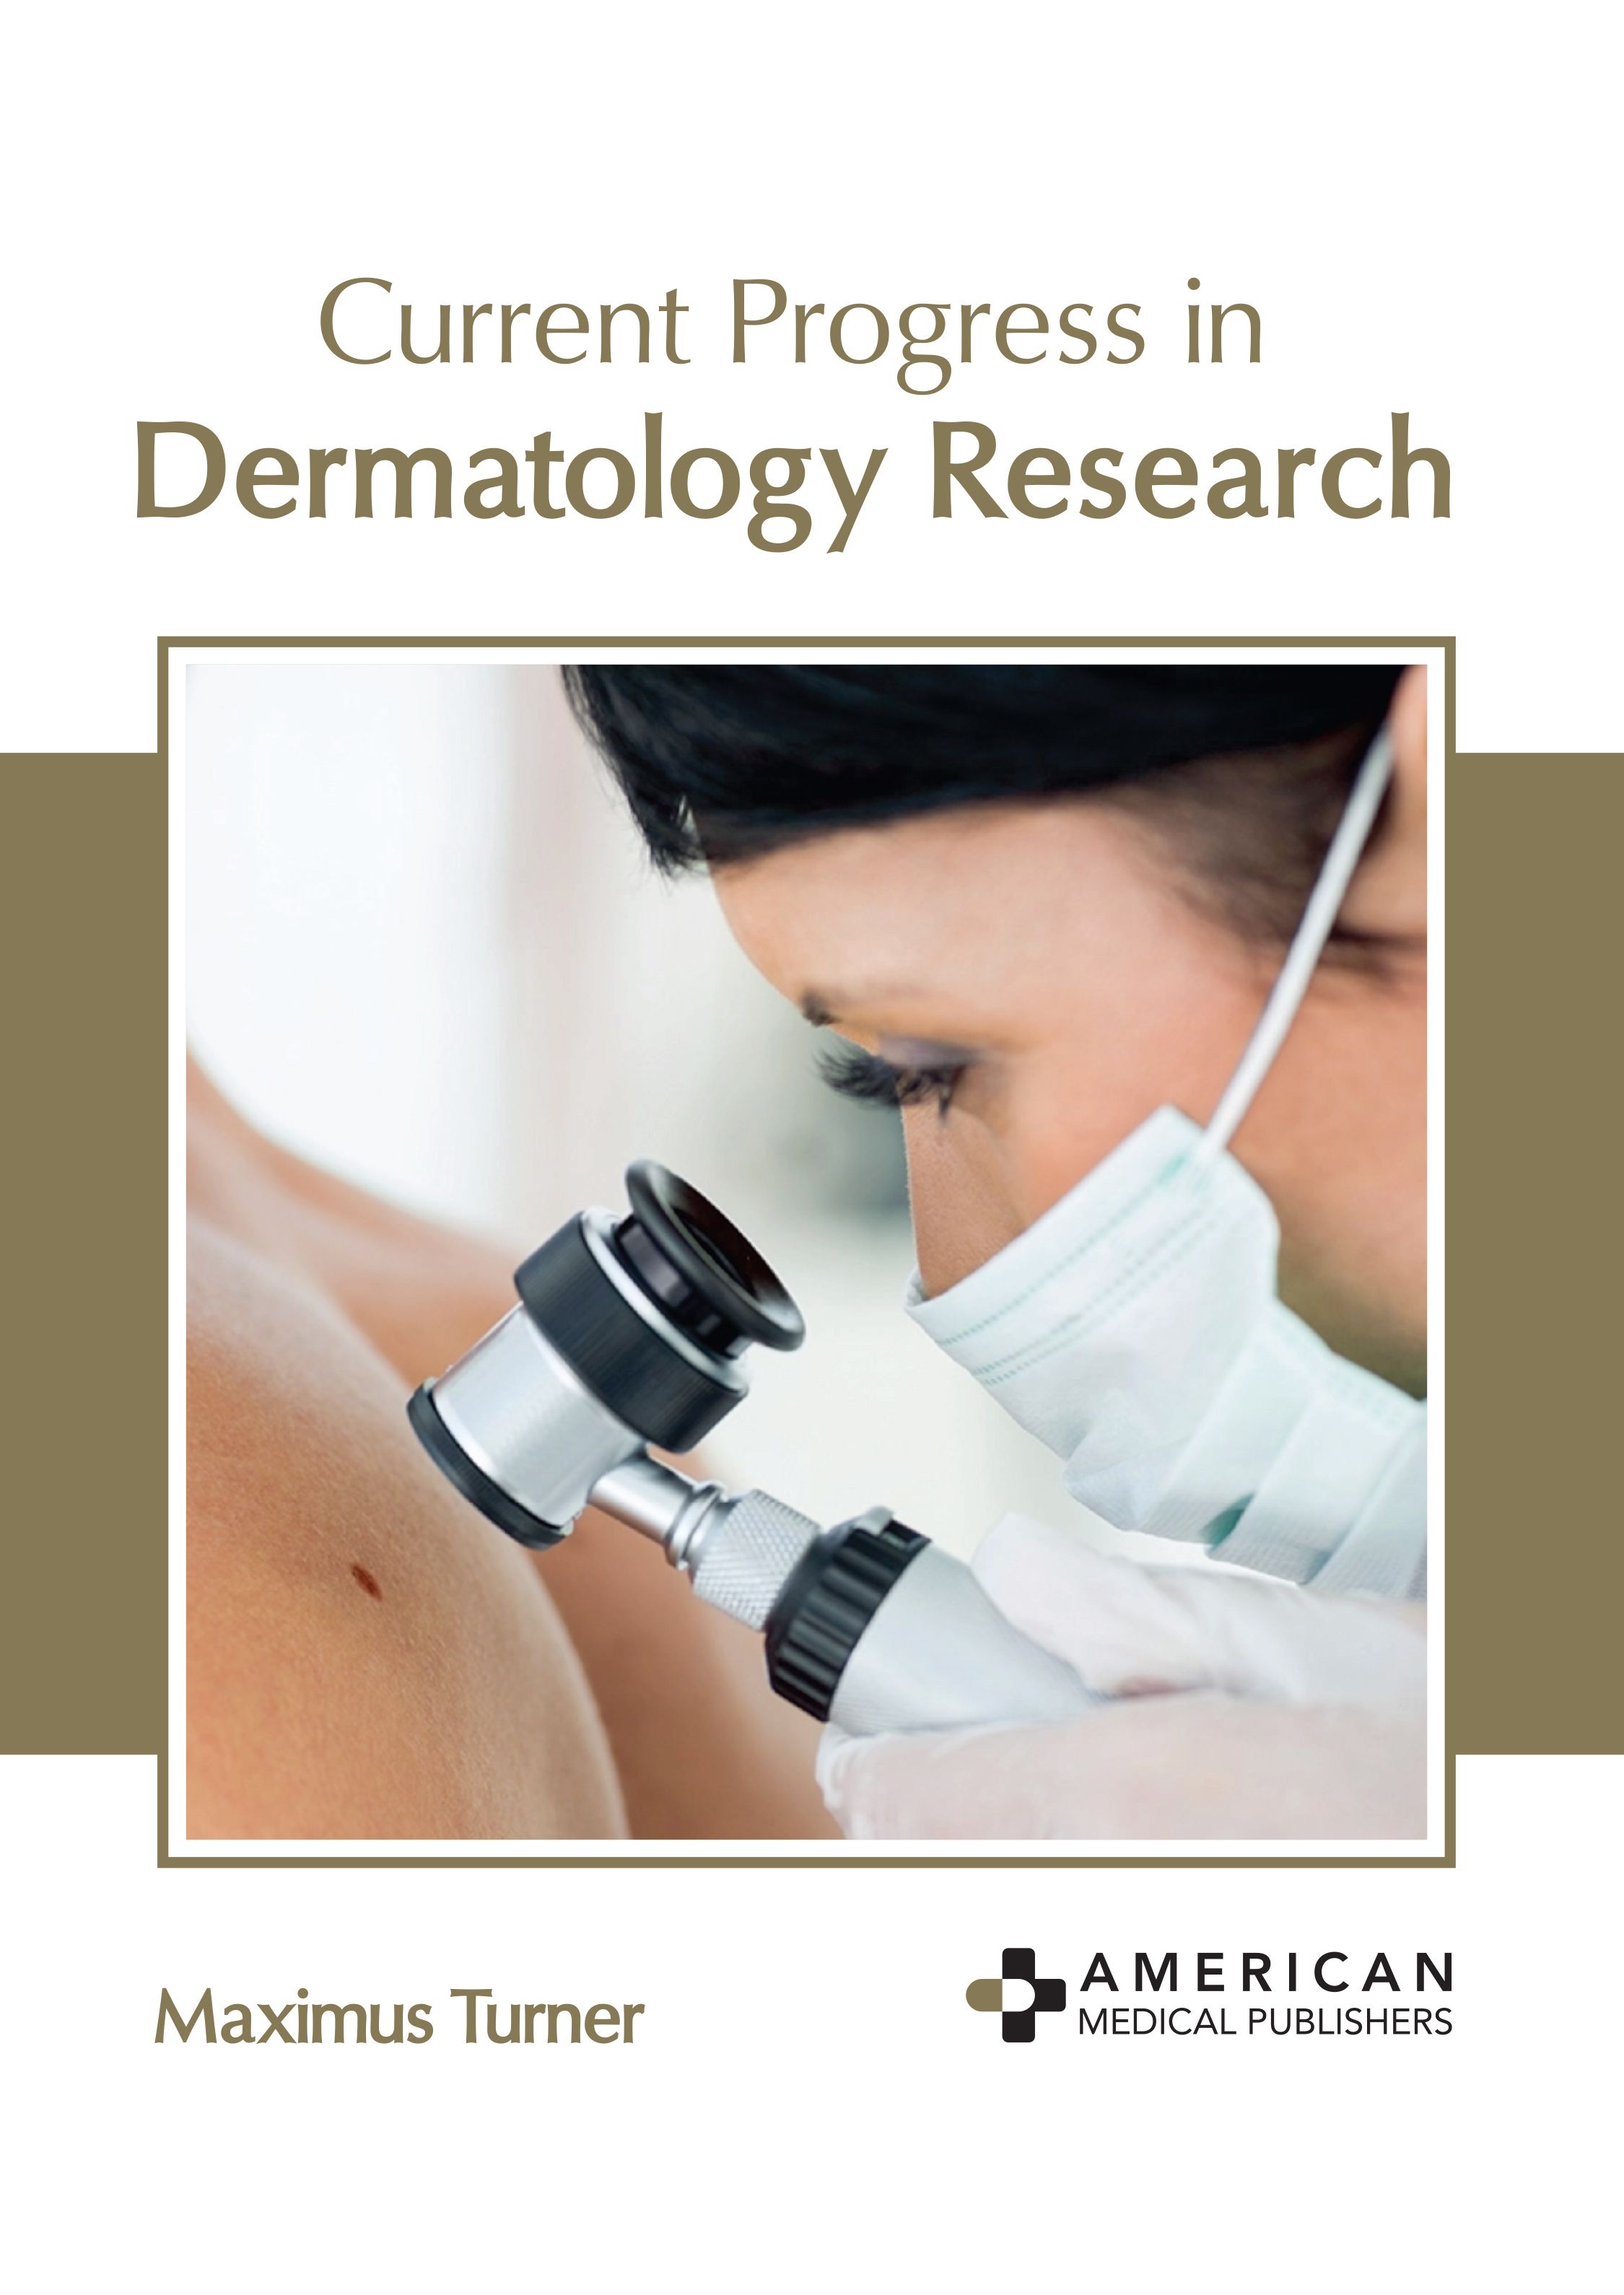 

exclusive-publishers/american-medical-publishers/current-progress-in-dermatology-research-9798887400341